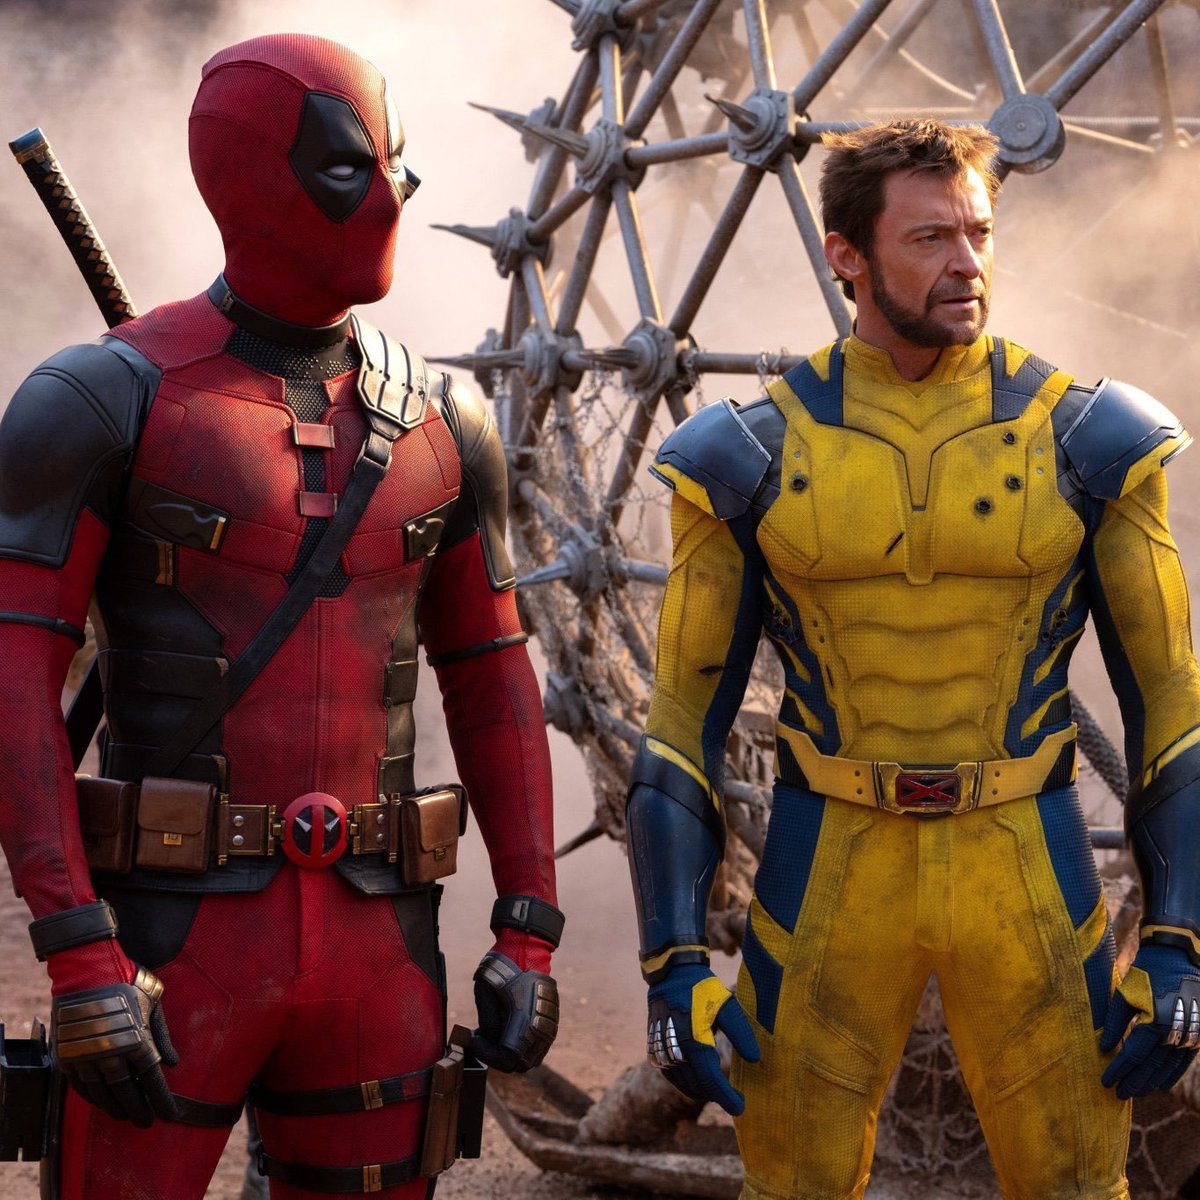 'DEADPOOL & WOLVERINE' reportedly earned $8-9M from first day ticket pre-sales The movie is expected to earn more than $100M during its opening debut ⚔️ (via: @THR)